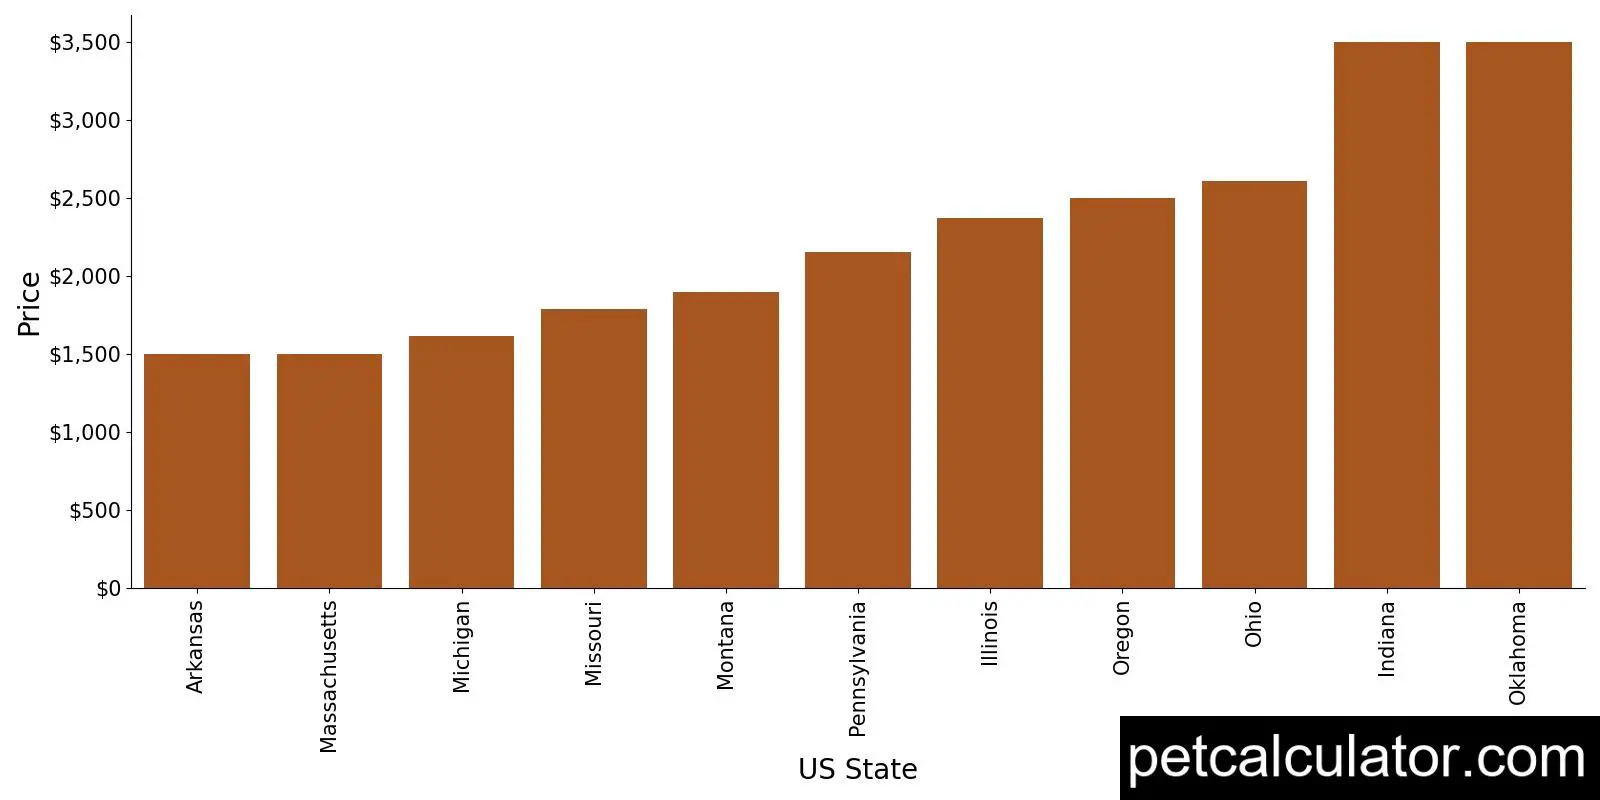 Price of Greater Swiss Mountain Dog by US State 